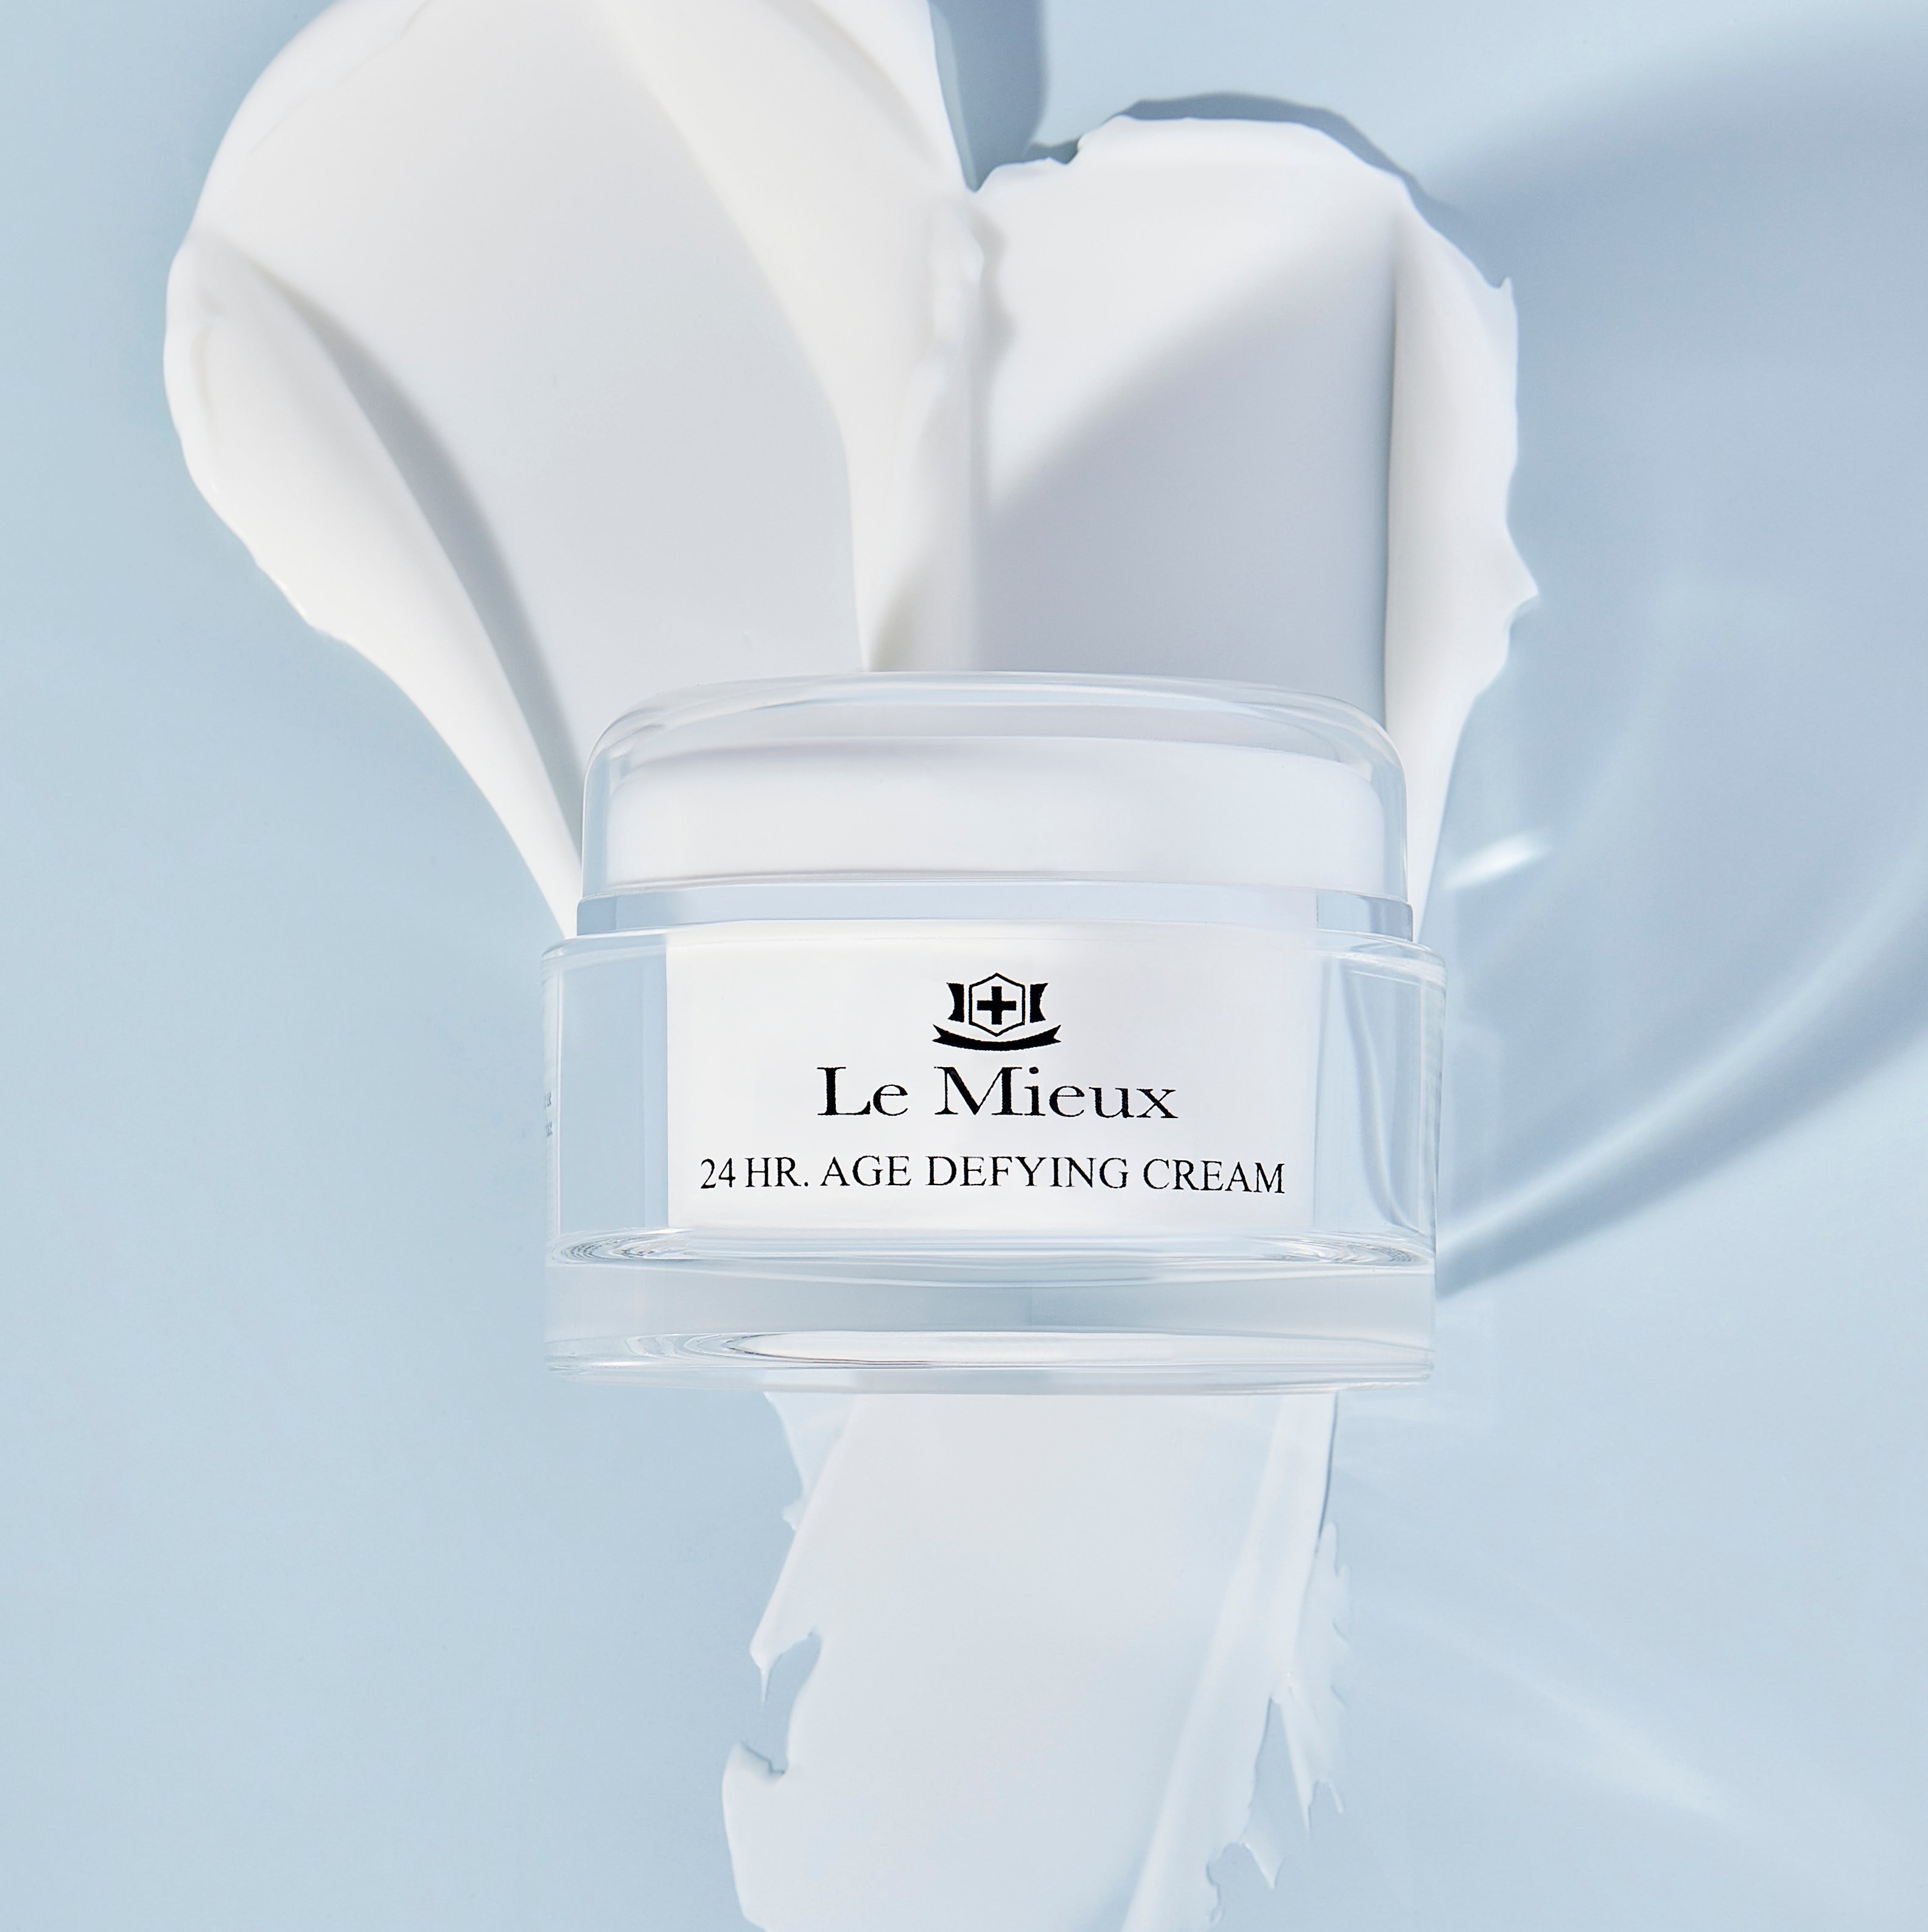  24 HR. AGE DEFYING CREAM from Le Mieux Skincare - 2